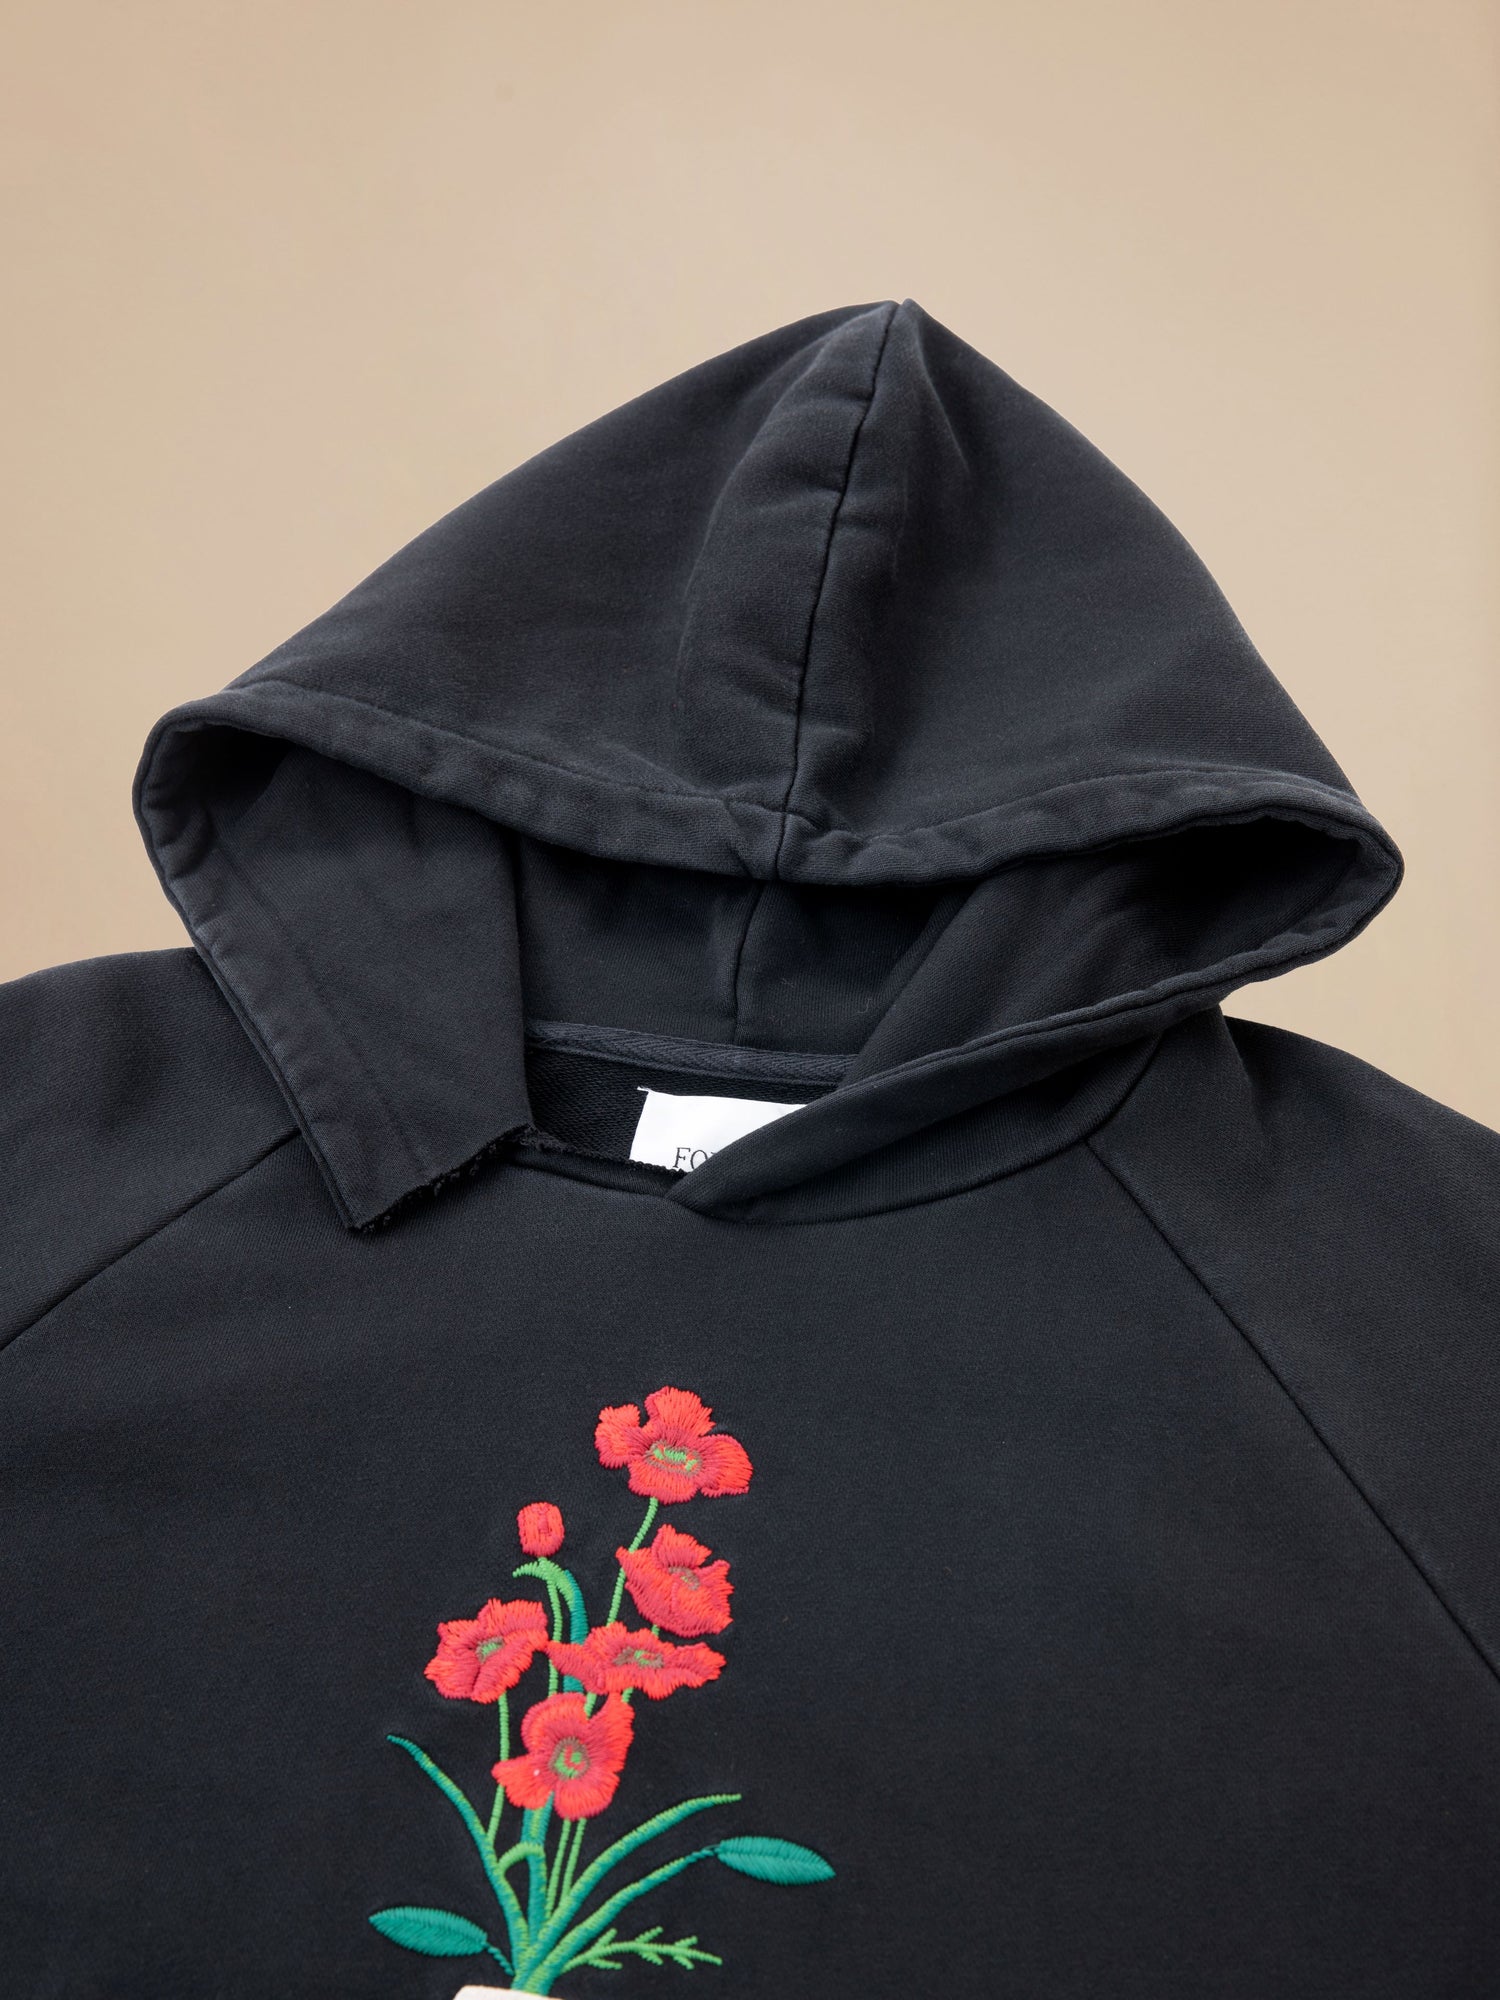 A black Flowers Vase Hoodie by Found with red flowers on it.